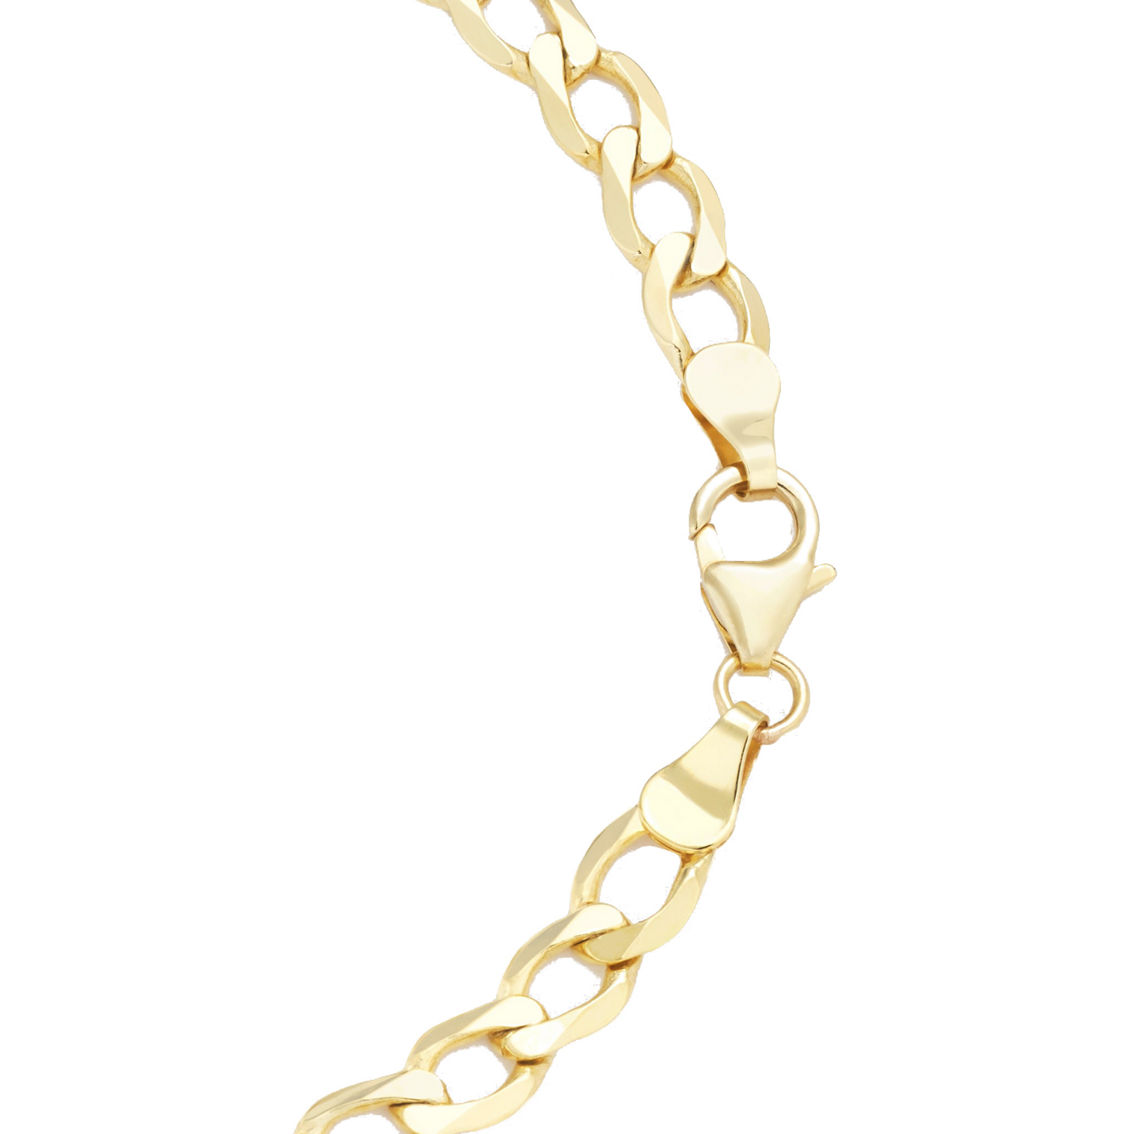 14K Yellow Gold 6mm Solid Open Curb Chain Bracelet 8 in. - Image 2 of 2